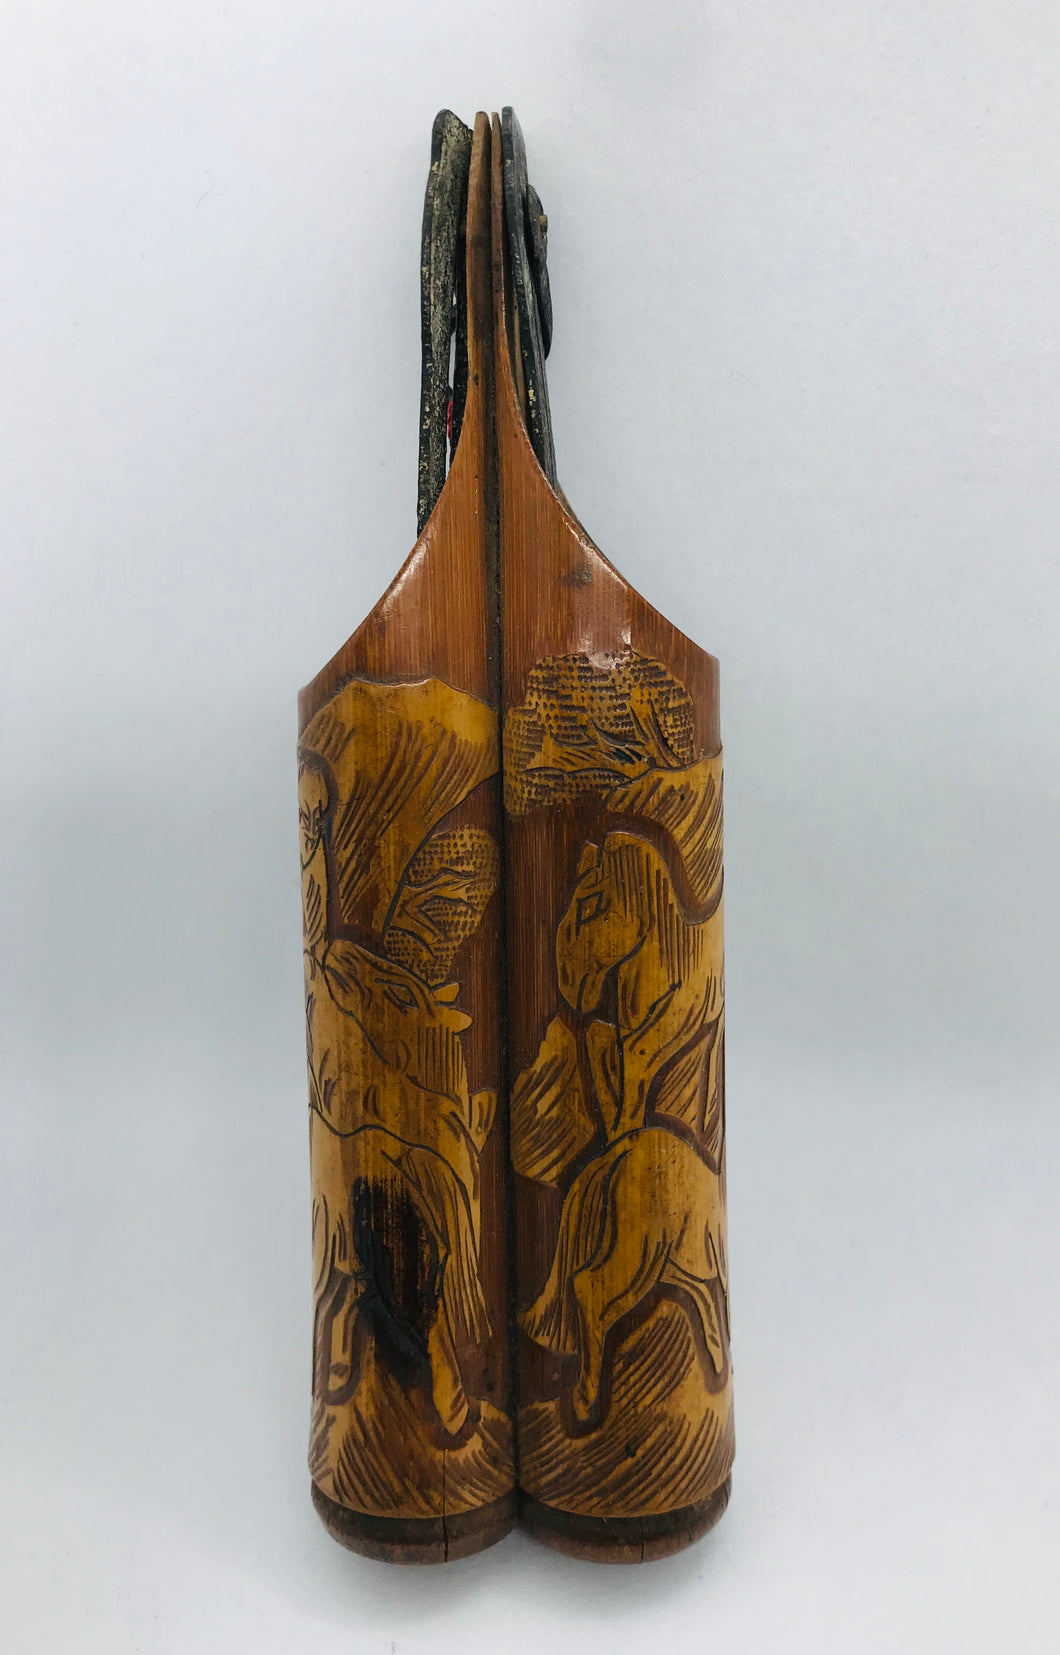 Bamboo Carving: Antique Chinese Bamboo Container with Carving of Horses